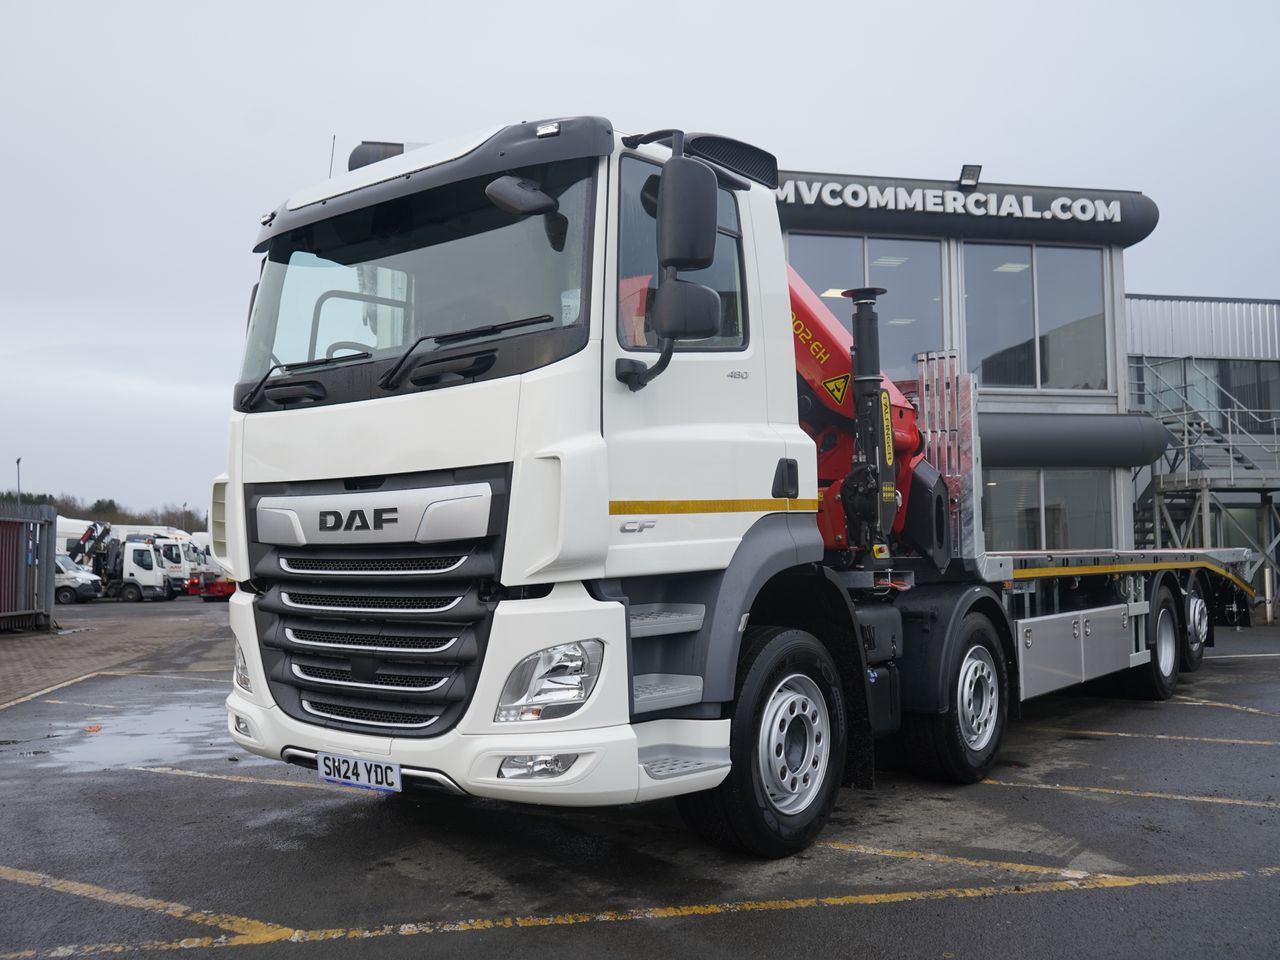 Ready to go DAF CF 480, Cheesewedge, 480, 32 Tonne, Day Cab, Automatic, Heated Mirrors, Lane Departure / Assist / Guard Warning System, Lashing Rings, LED Daytime Running Lights, MX Engine Brake, , Palfinger, PK33002-EH | for sale at MV Commercial, the UKs leading Truck, Trailers and Van supplier. (SN24YDC 113620)